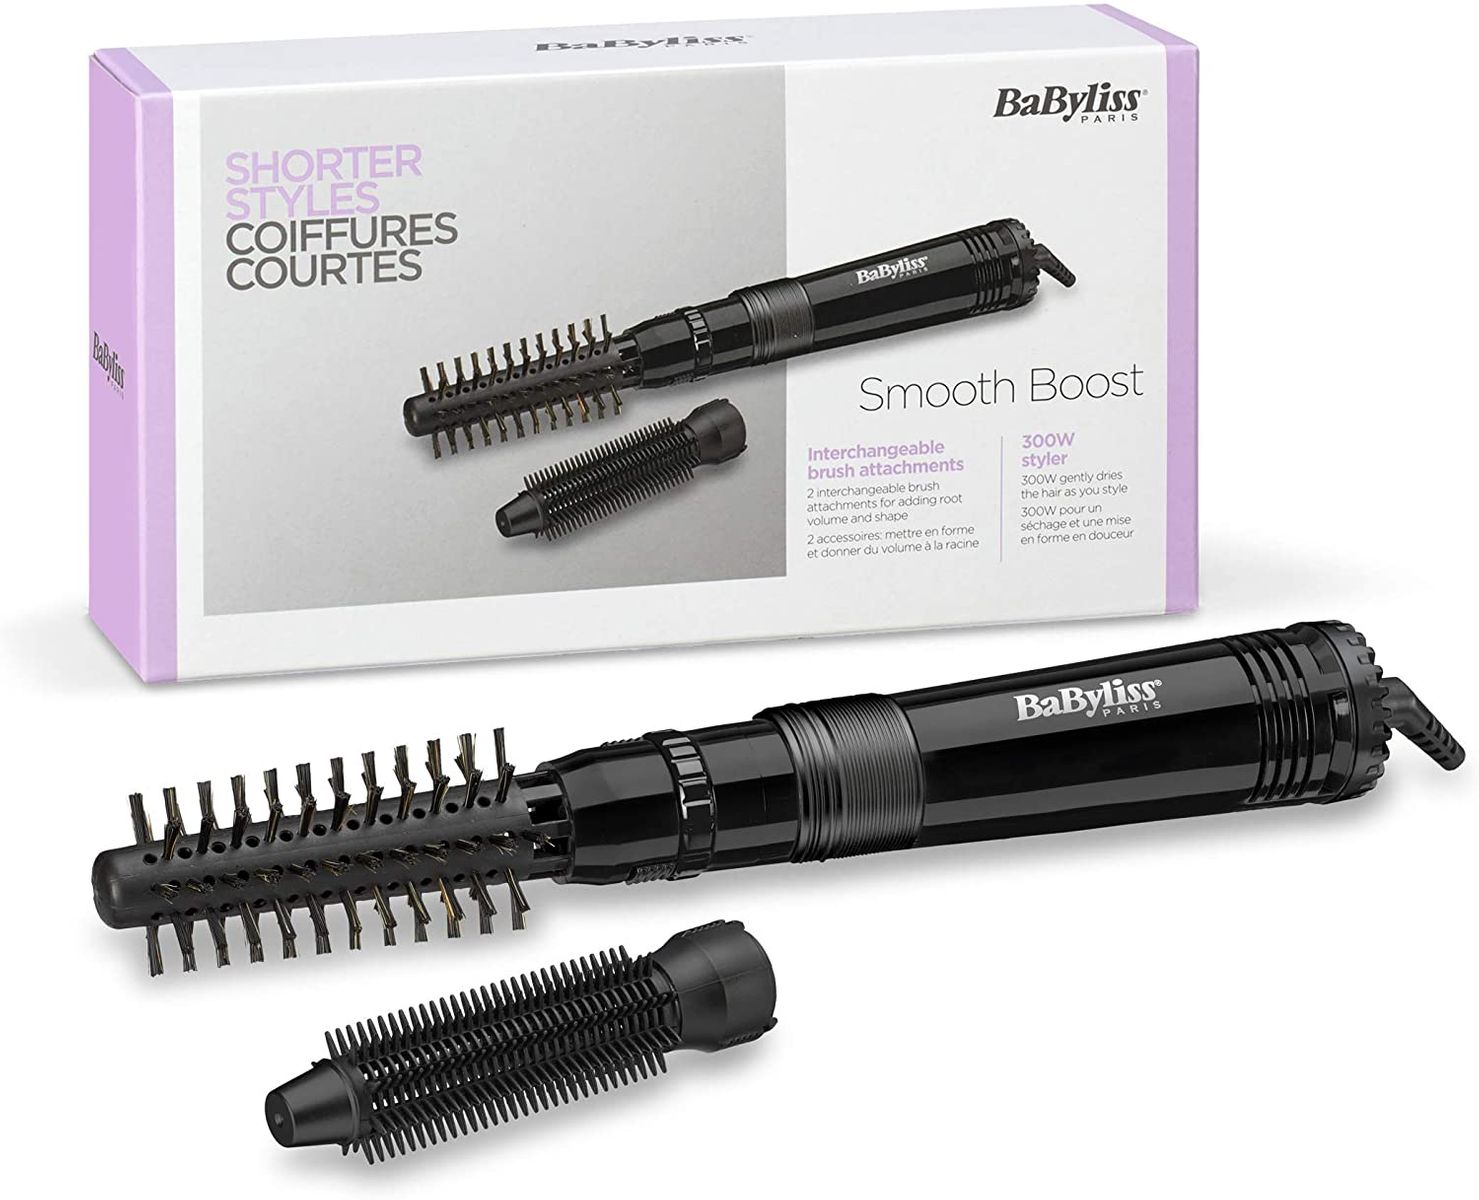 BaByliss Smooth Boost Wam Air Brush 668E with 2 brush attachments and dual voltage for travel abroad Black